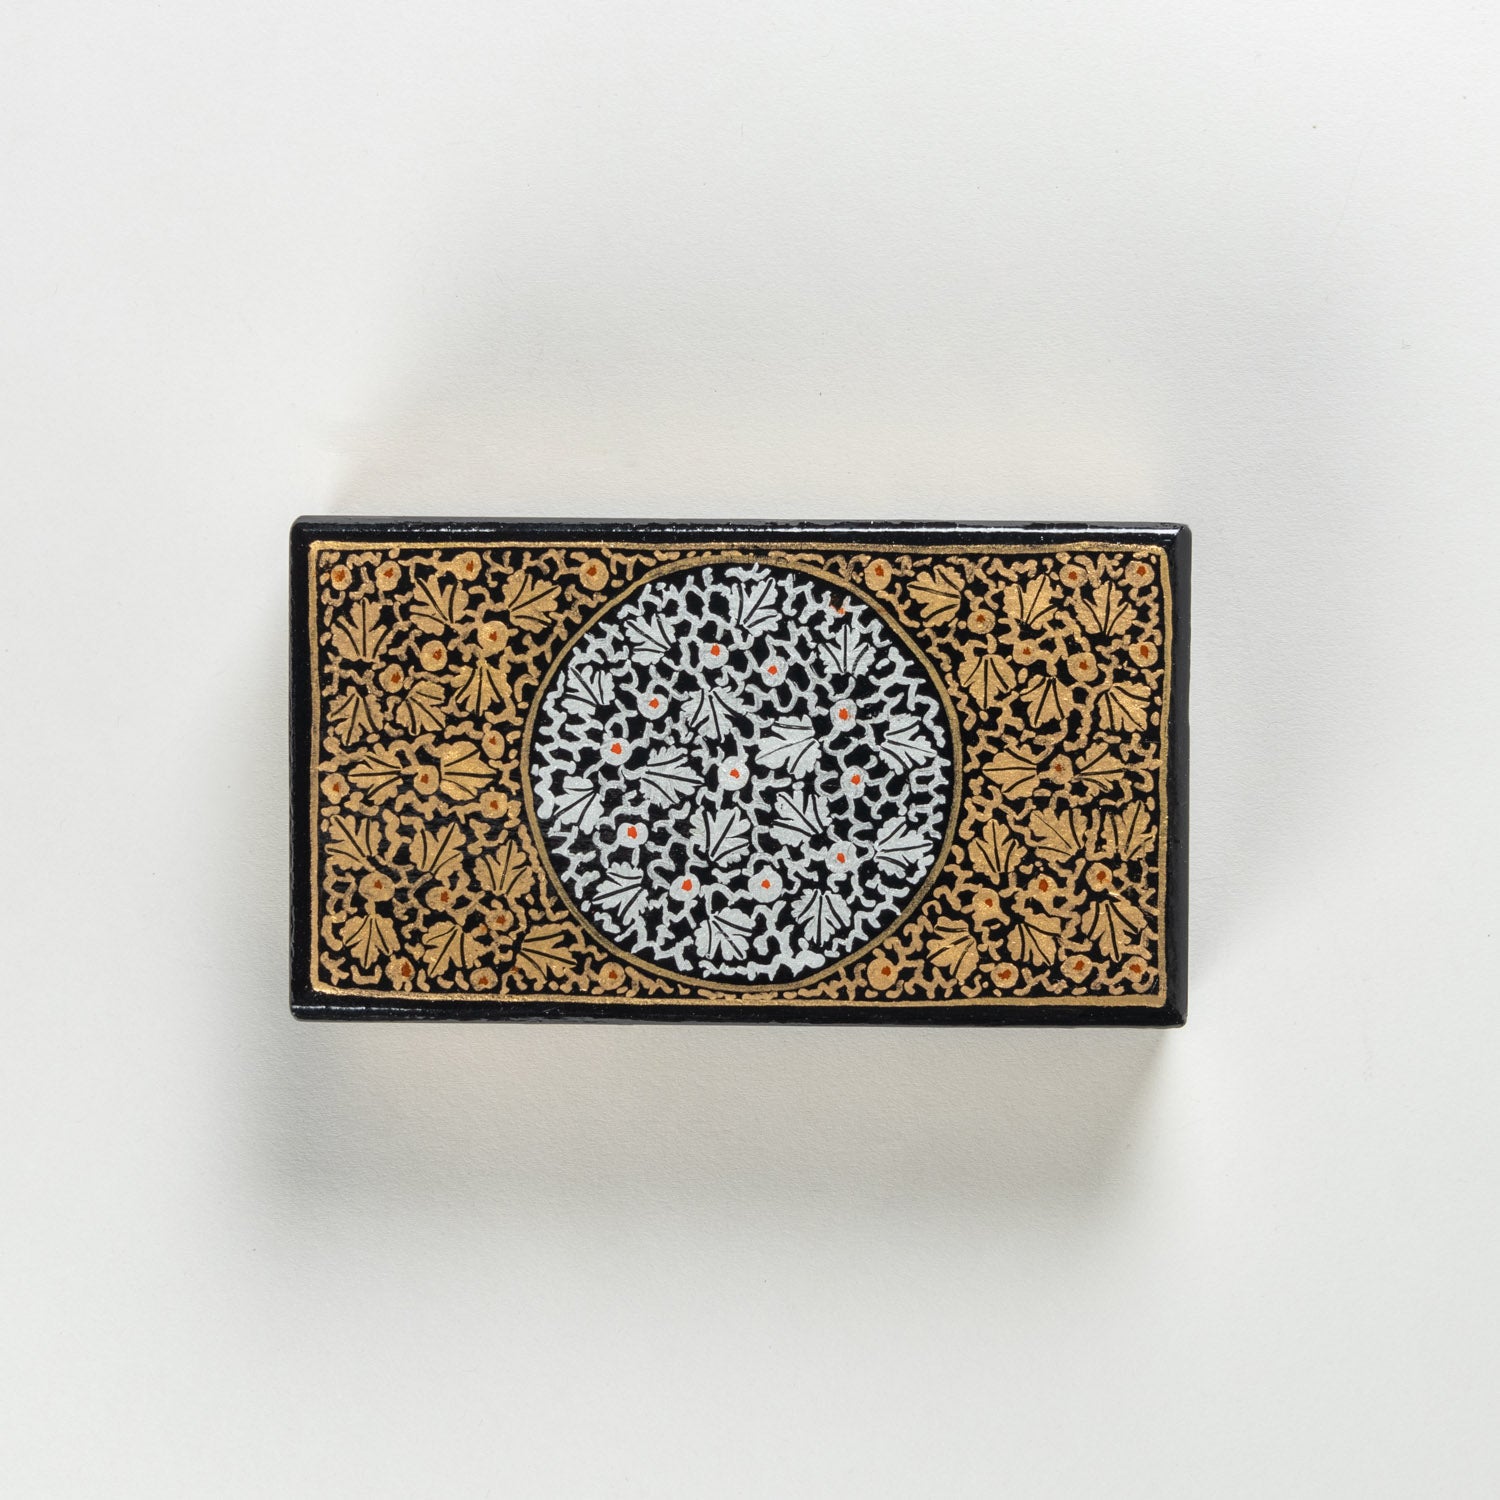 Hand Painted Papier Mache Box in Black, Gold, White, Chinar - 4x7